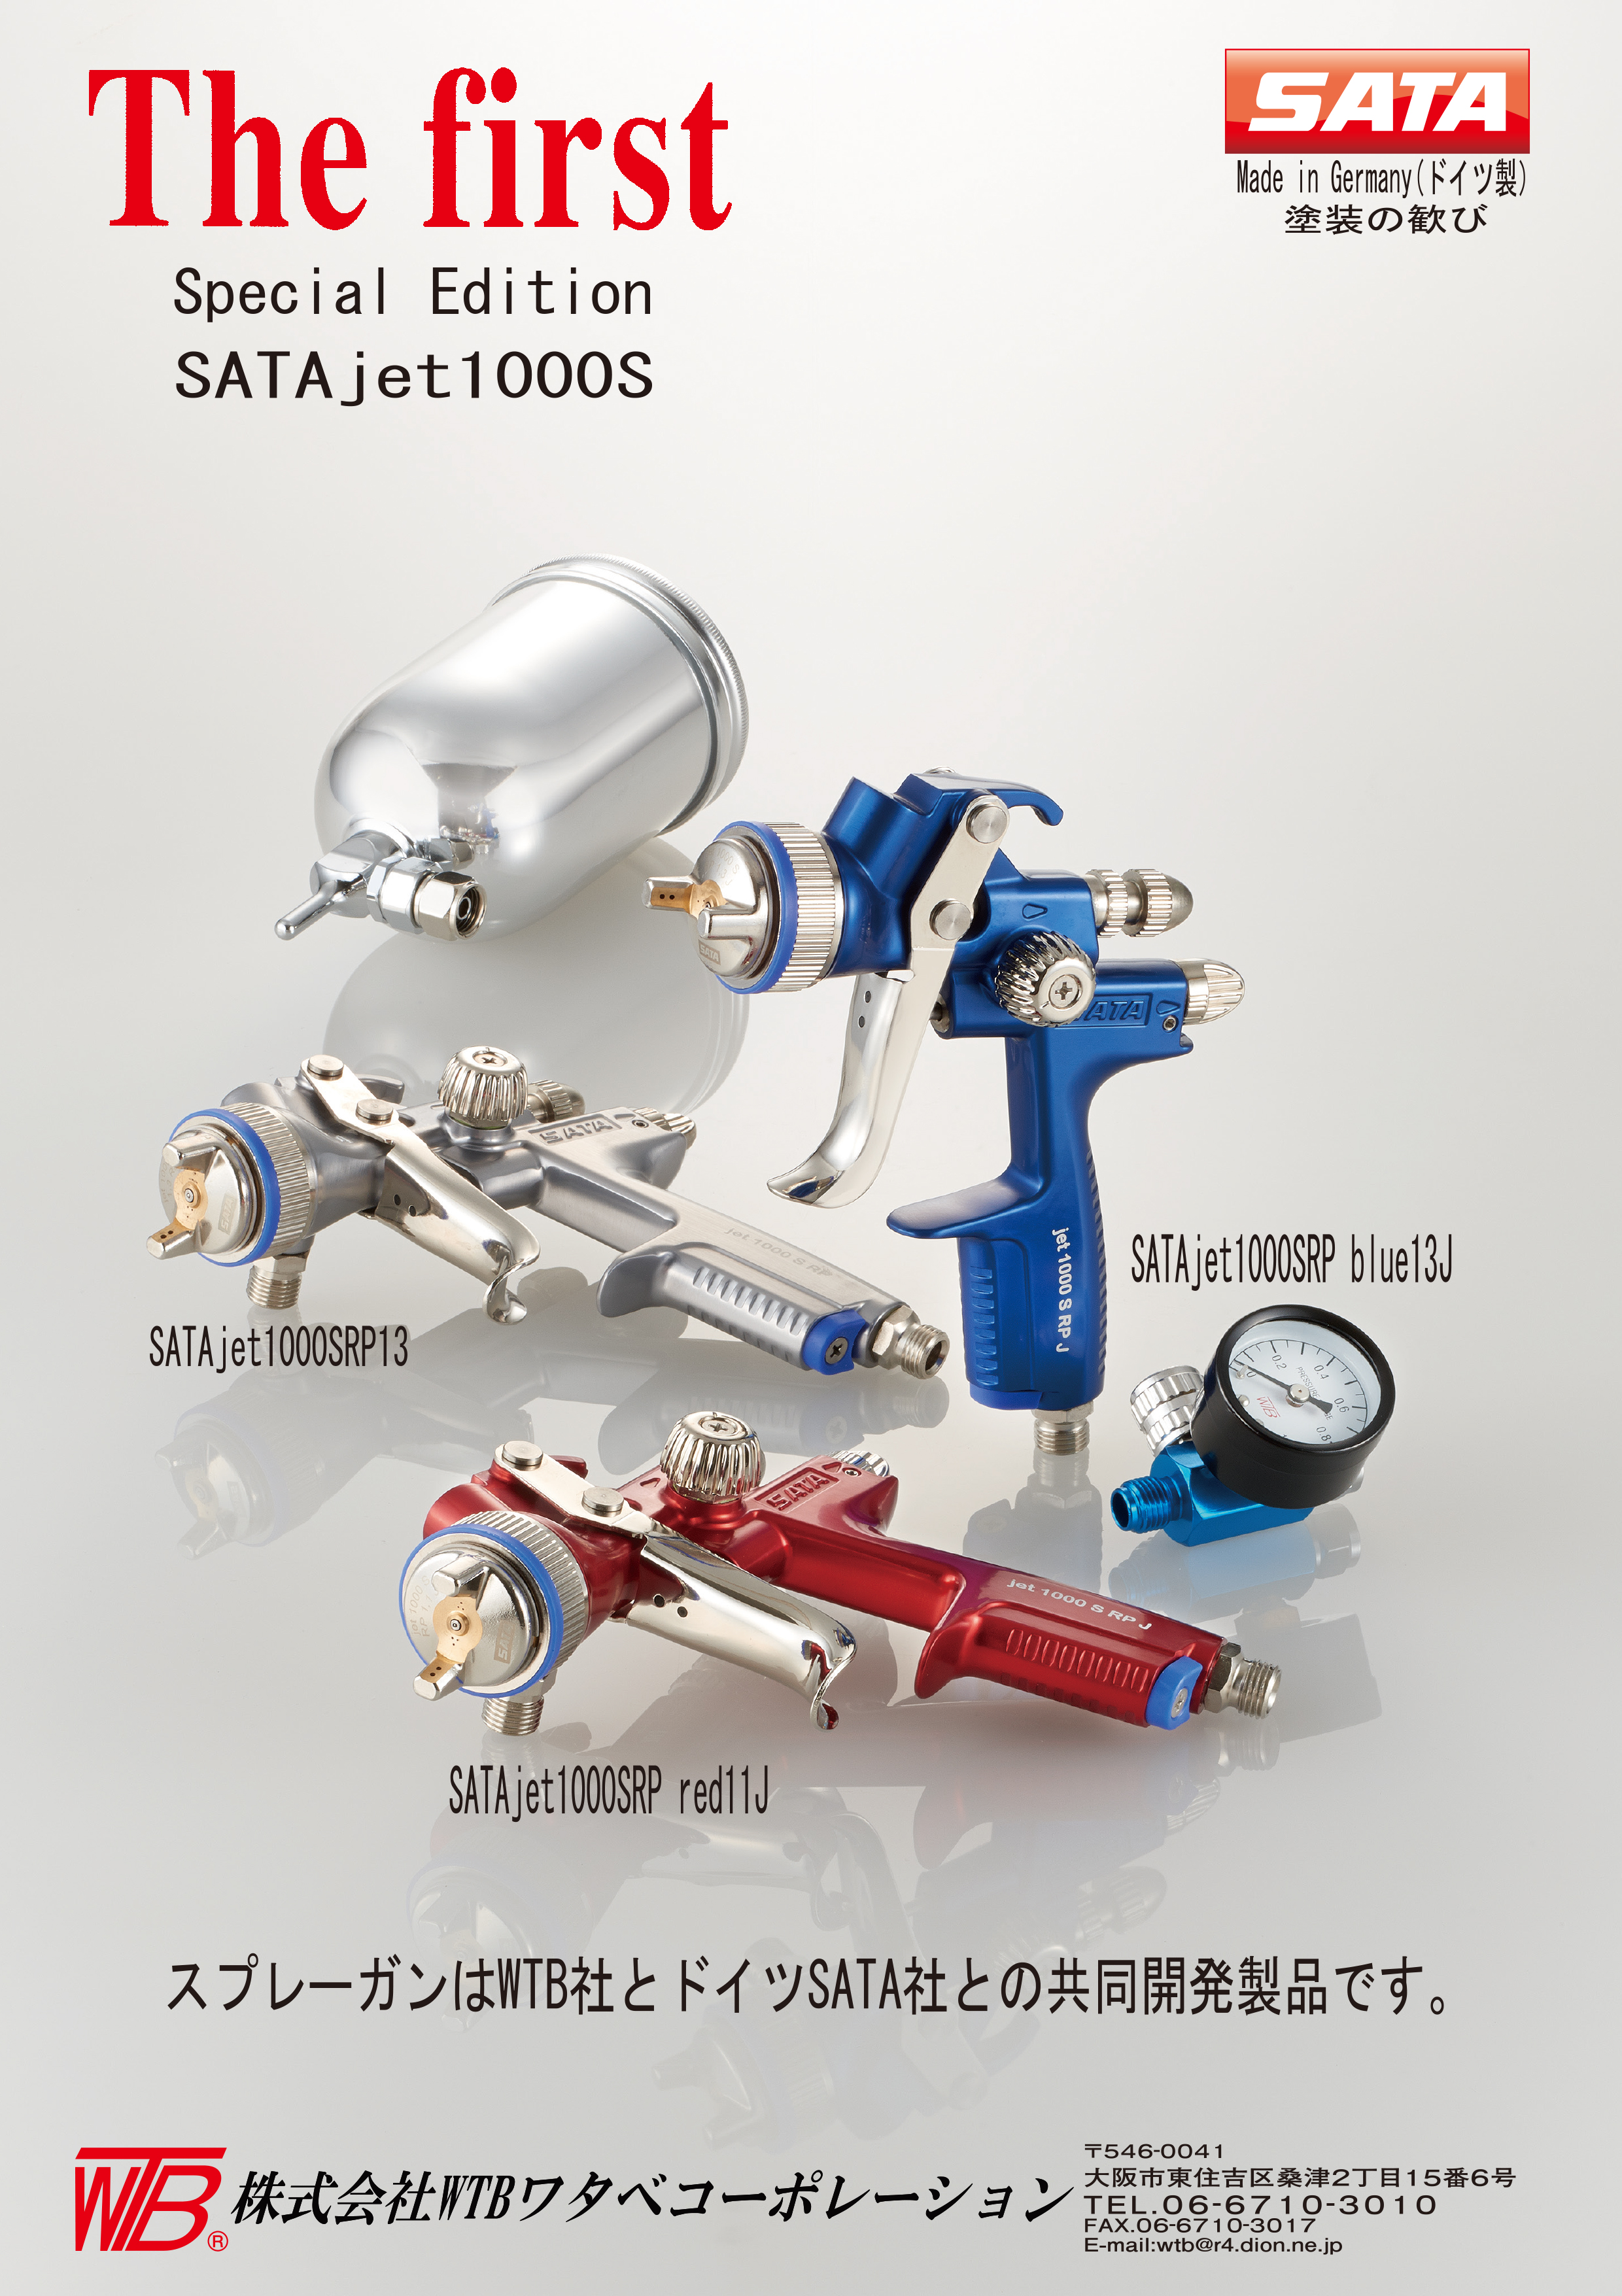 The first Special Edition SATA jet1000S